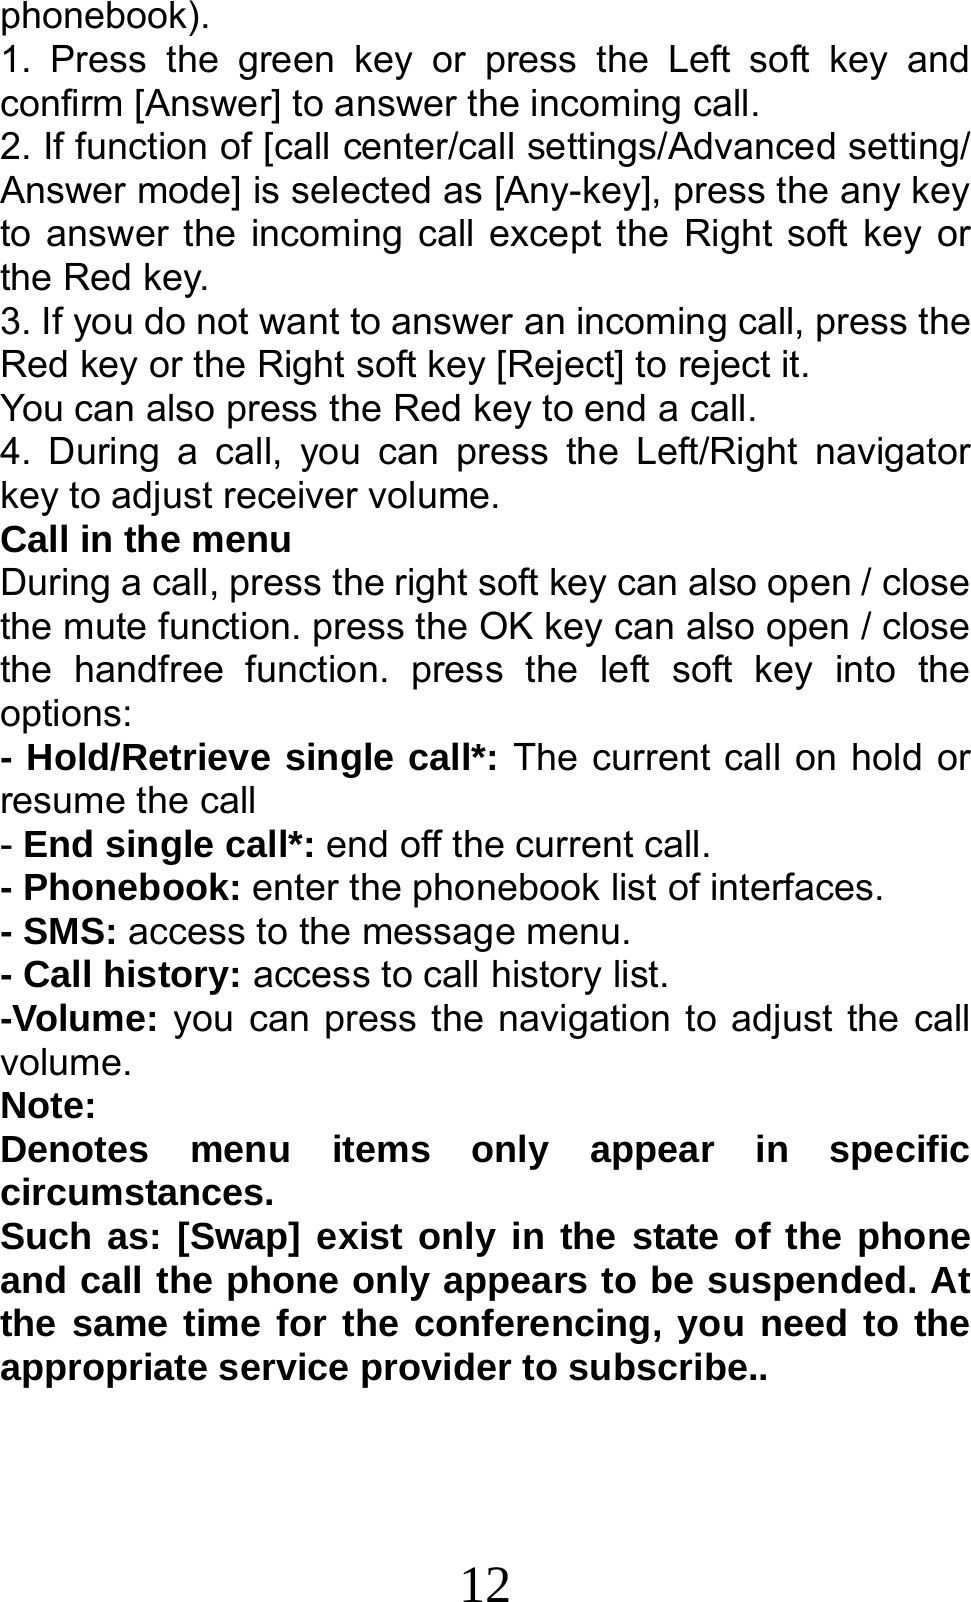 12 phonebook). 1. Press the green key or press the Left soft key and confirm [Answer] to answer the incoming call. 2. If function of [call center/call settings/Advanced setting/ Answer mode] is selected as [Any-key], press the any key to answer the incoming call except the Right soft key or the Red key. 3. If you do not want to answer an incoming call, press the Red key or the Right soft key [Reject] to reject it. You can also press the Red key to end a call.   4. During a call, you can press the Left/Right navigator key to adjust receiver volume. Call in the menu During a call, press the right soft key can also open / close the mute function. press the OK key can also open / close the handfree function. press the left soft key into the options: - Hold/Retrieve single call*: The current call on hold or resume the call - End single call*: end off the current call.   - Phonebook: enter the phonebook list of interfaces. - SMS: access to the message menu. - Call history: access to call history list. -Volume: you can press the navigation to adjust the call volume. Note:  Denotes menu items only appear in specific circumstances.  Such as: [Swap] exist only in the state of the phone and call the phone only appears to be suspended. At the same time for the conferencing, you need to the appropriate service provider to subscribe.. 